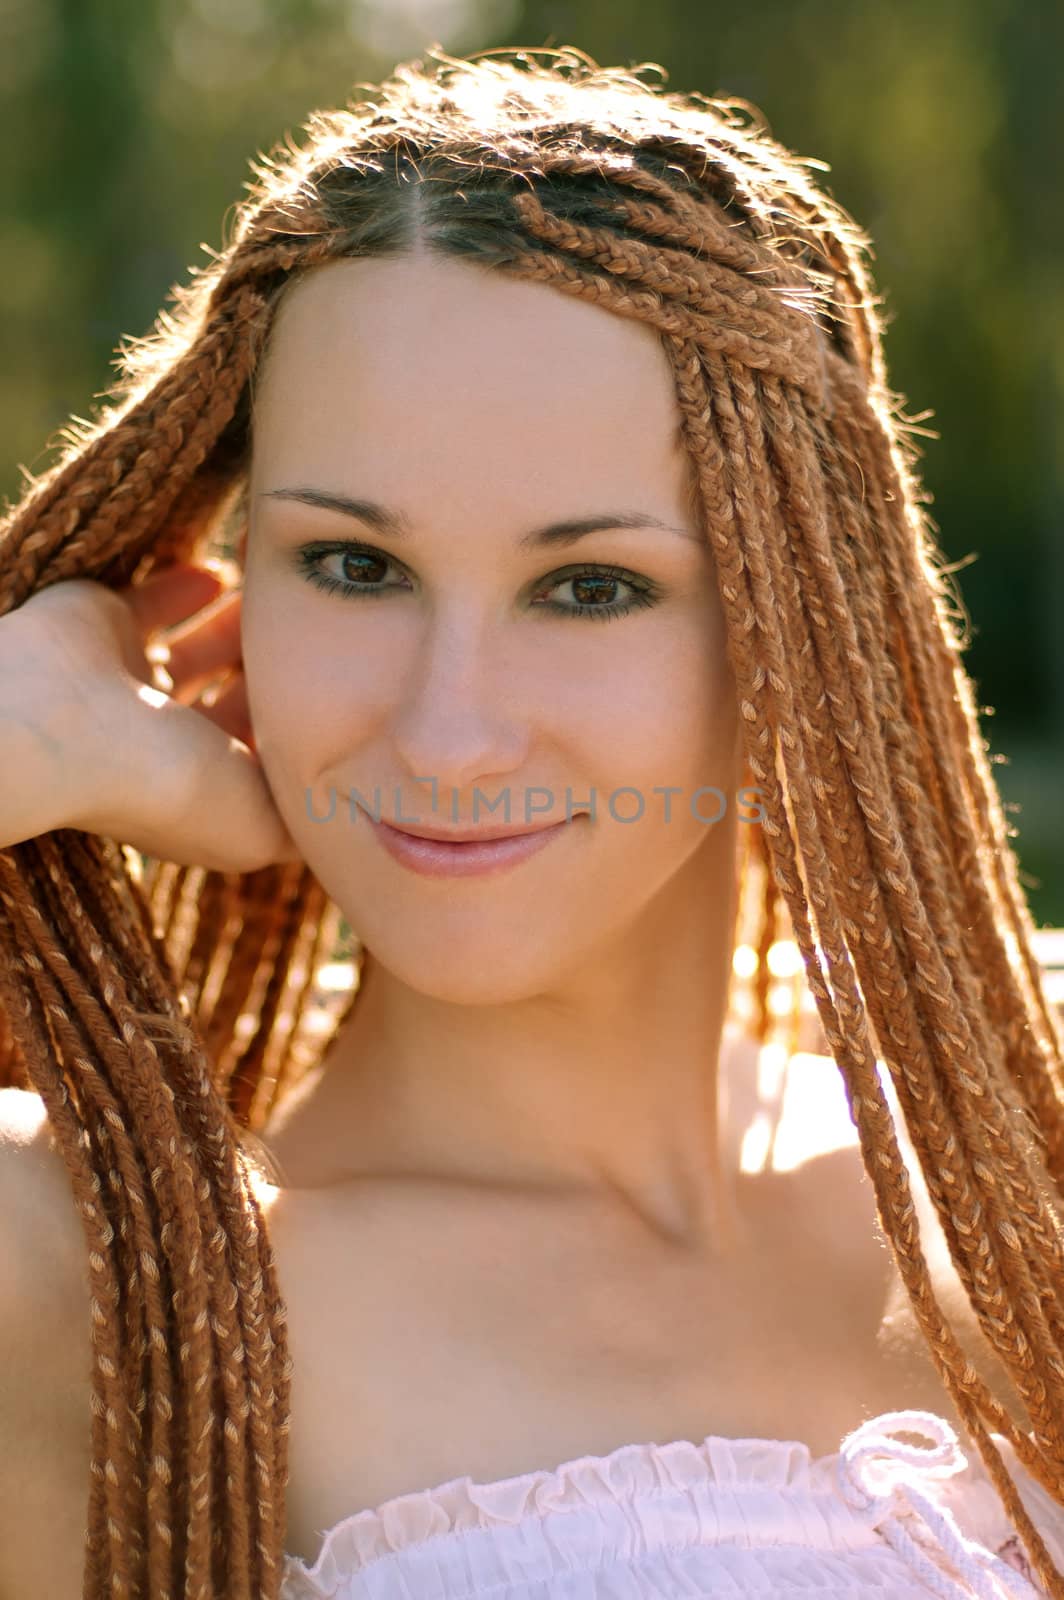 Beautiful girl with pigtails in the park summer morning